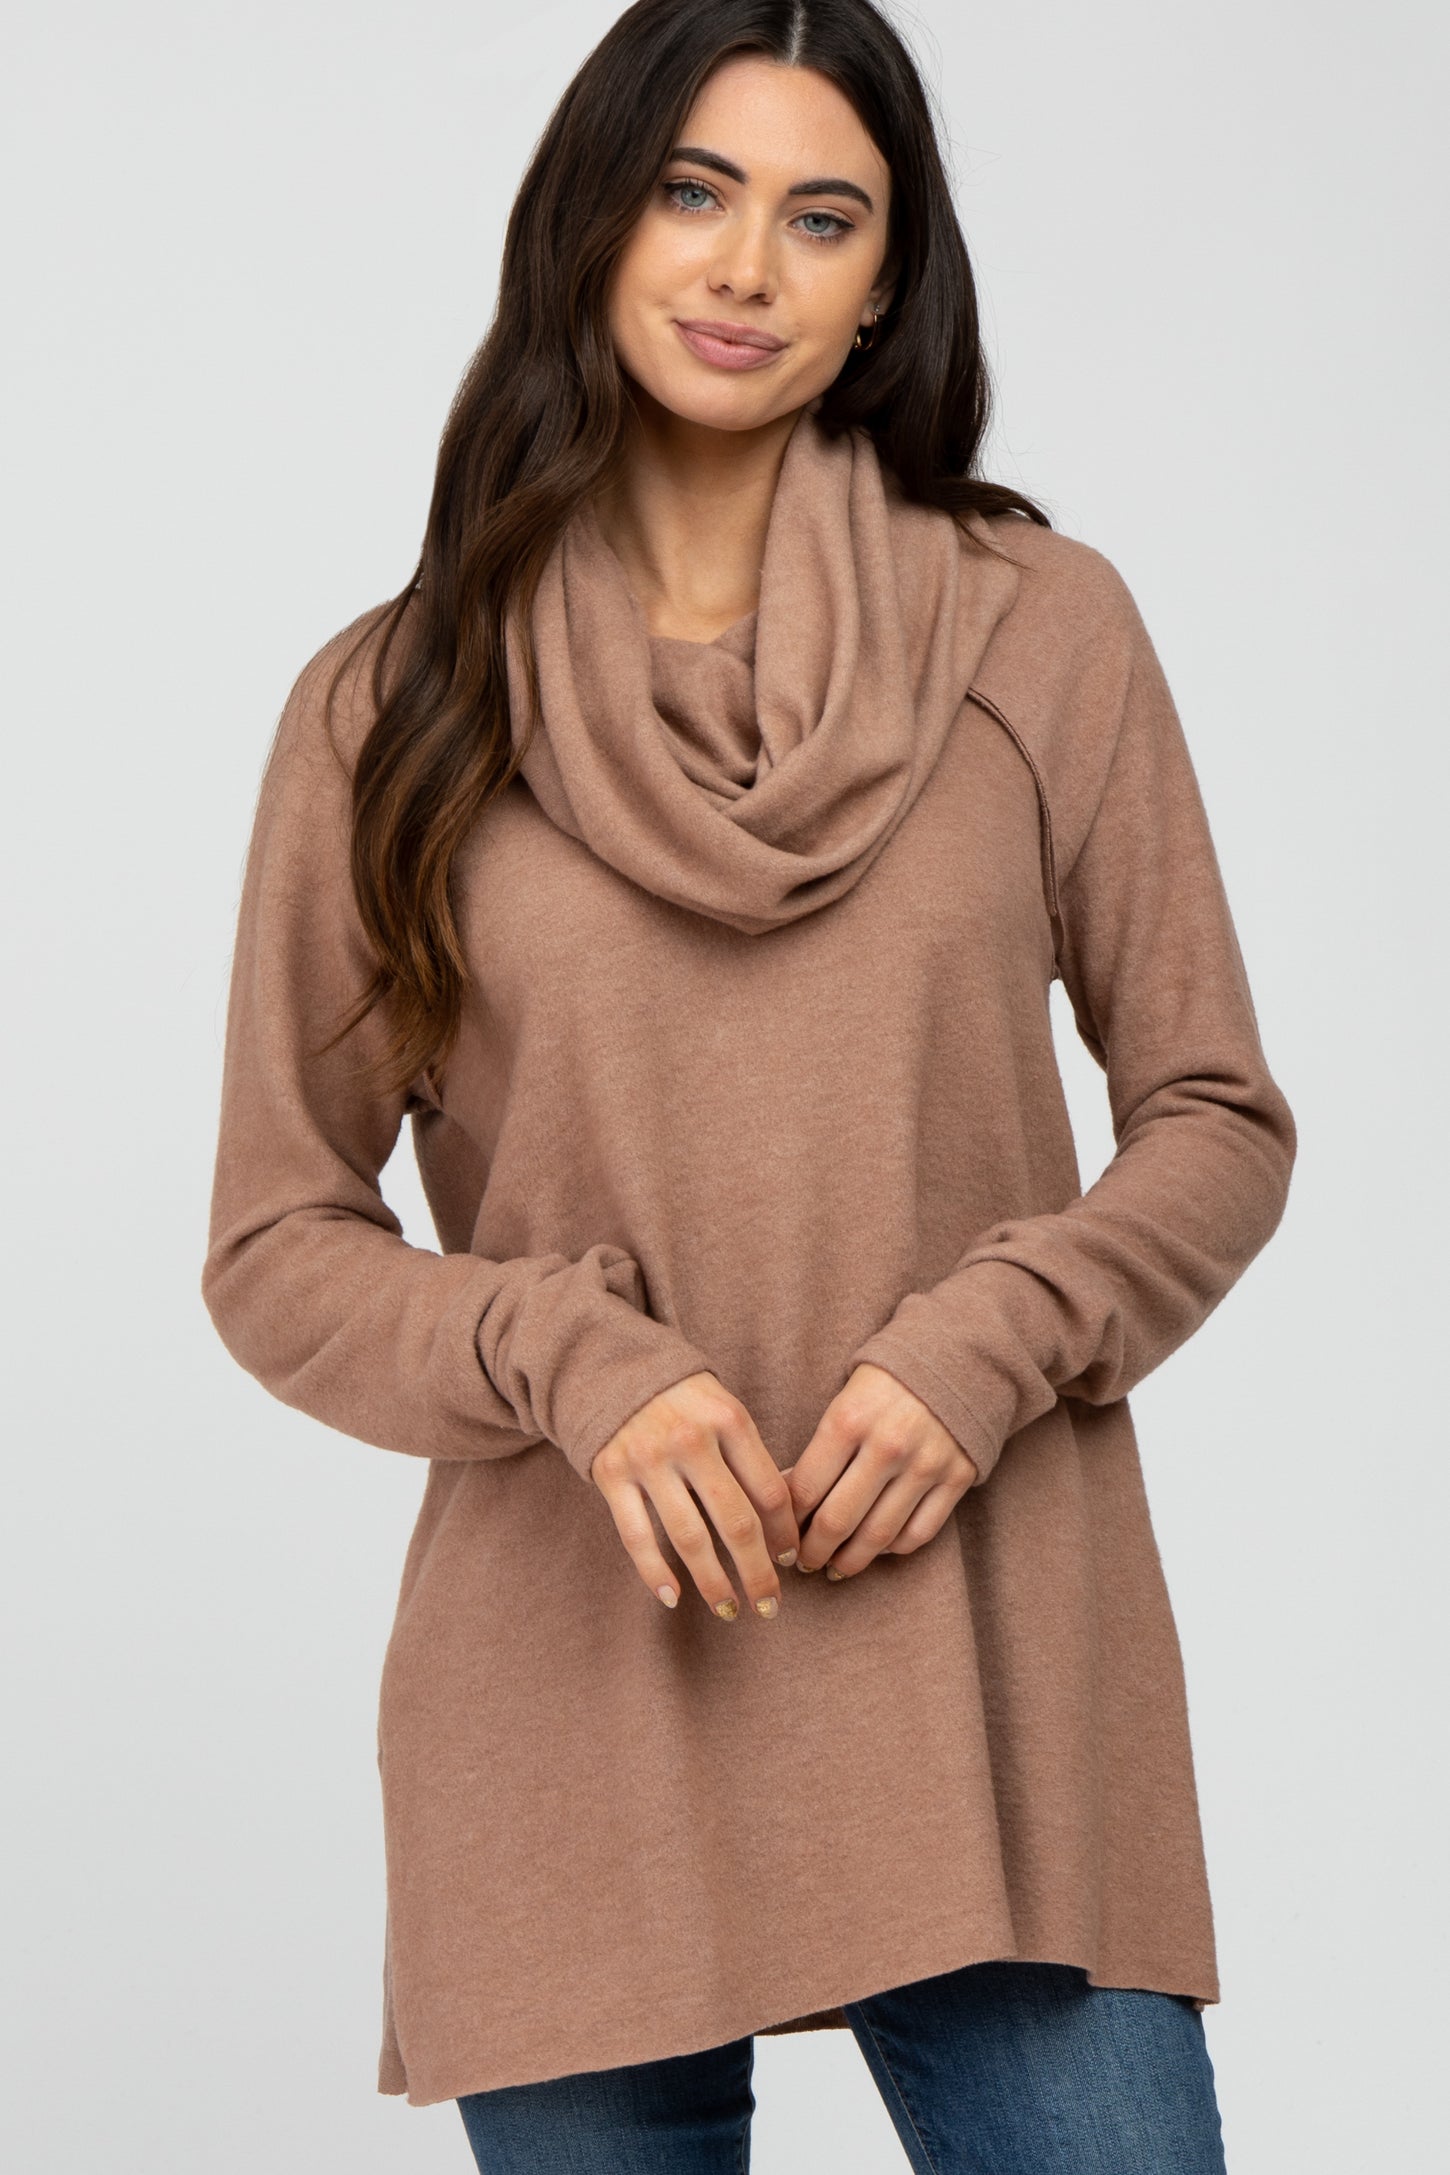 Camel Brushed Knit Cowl Neck Long Sleeve Top